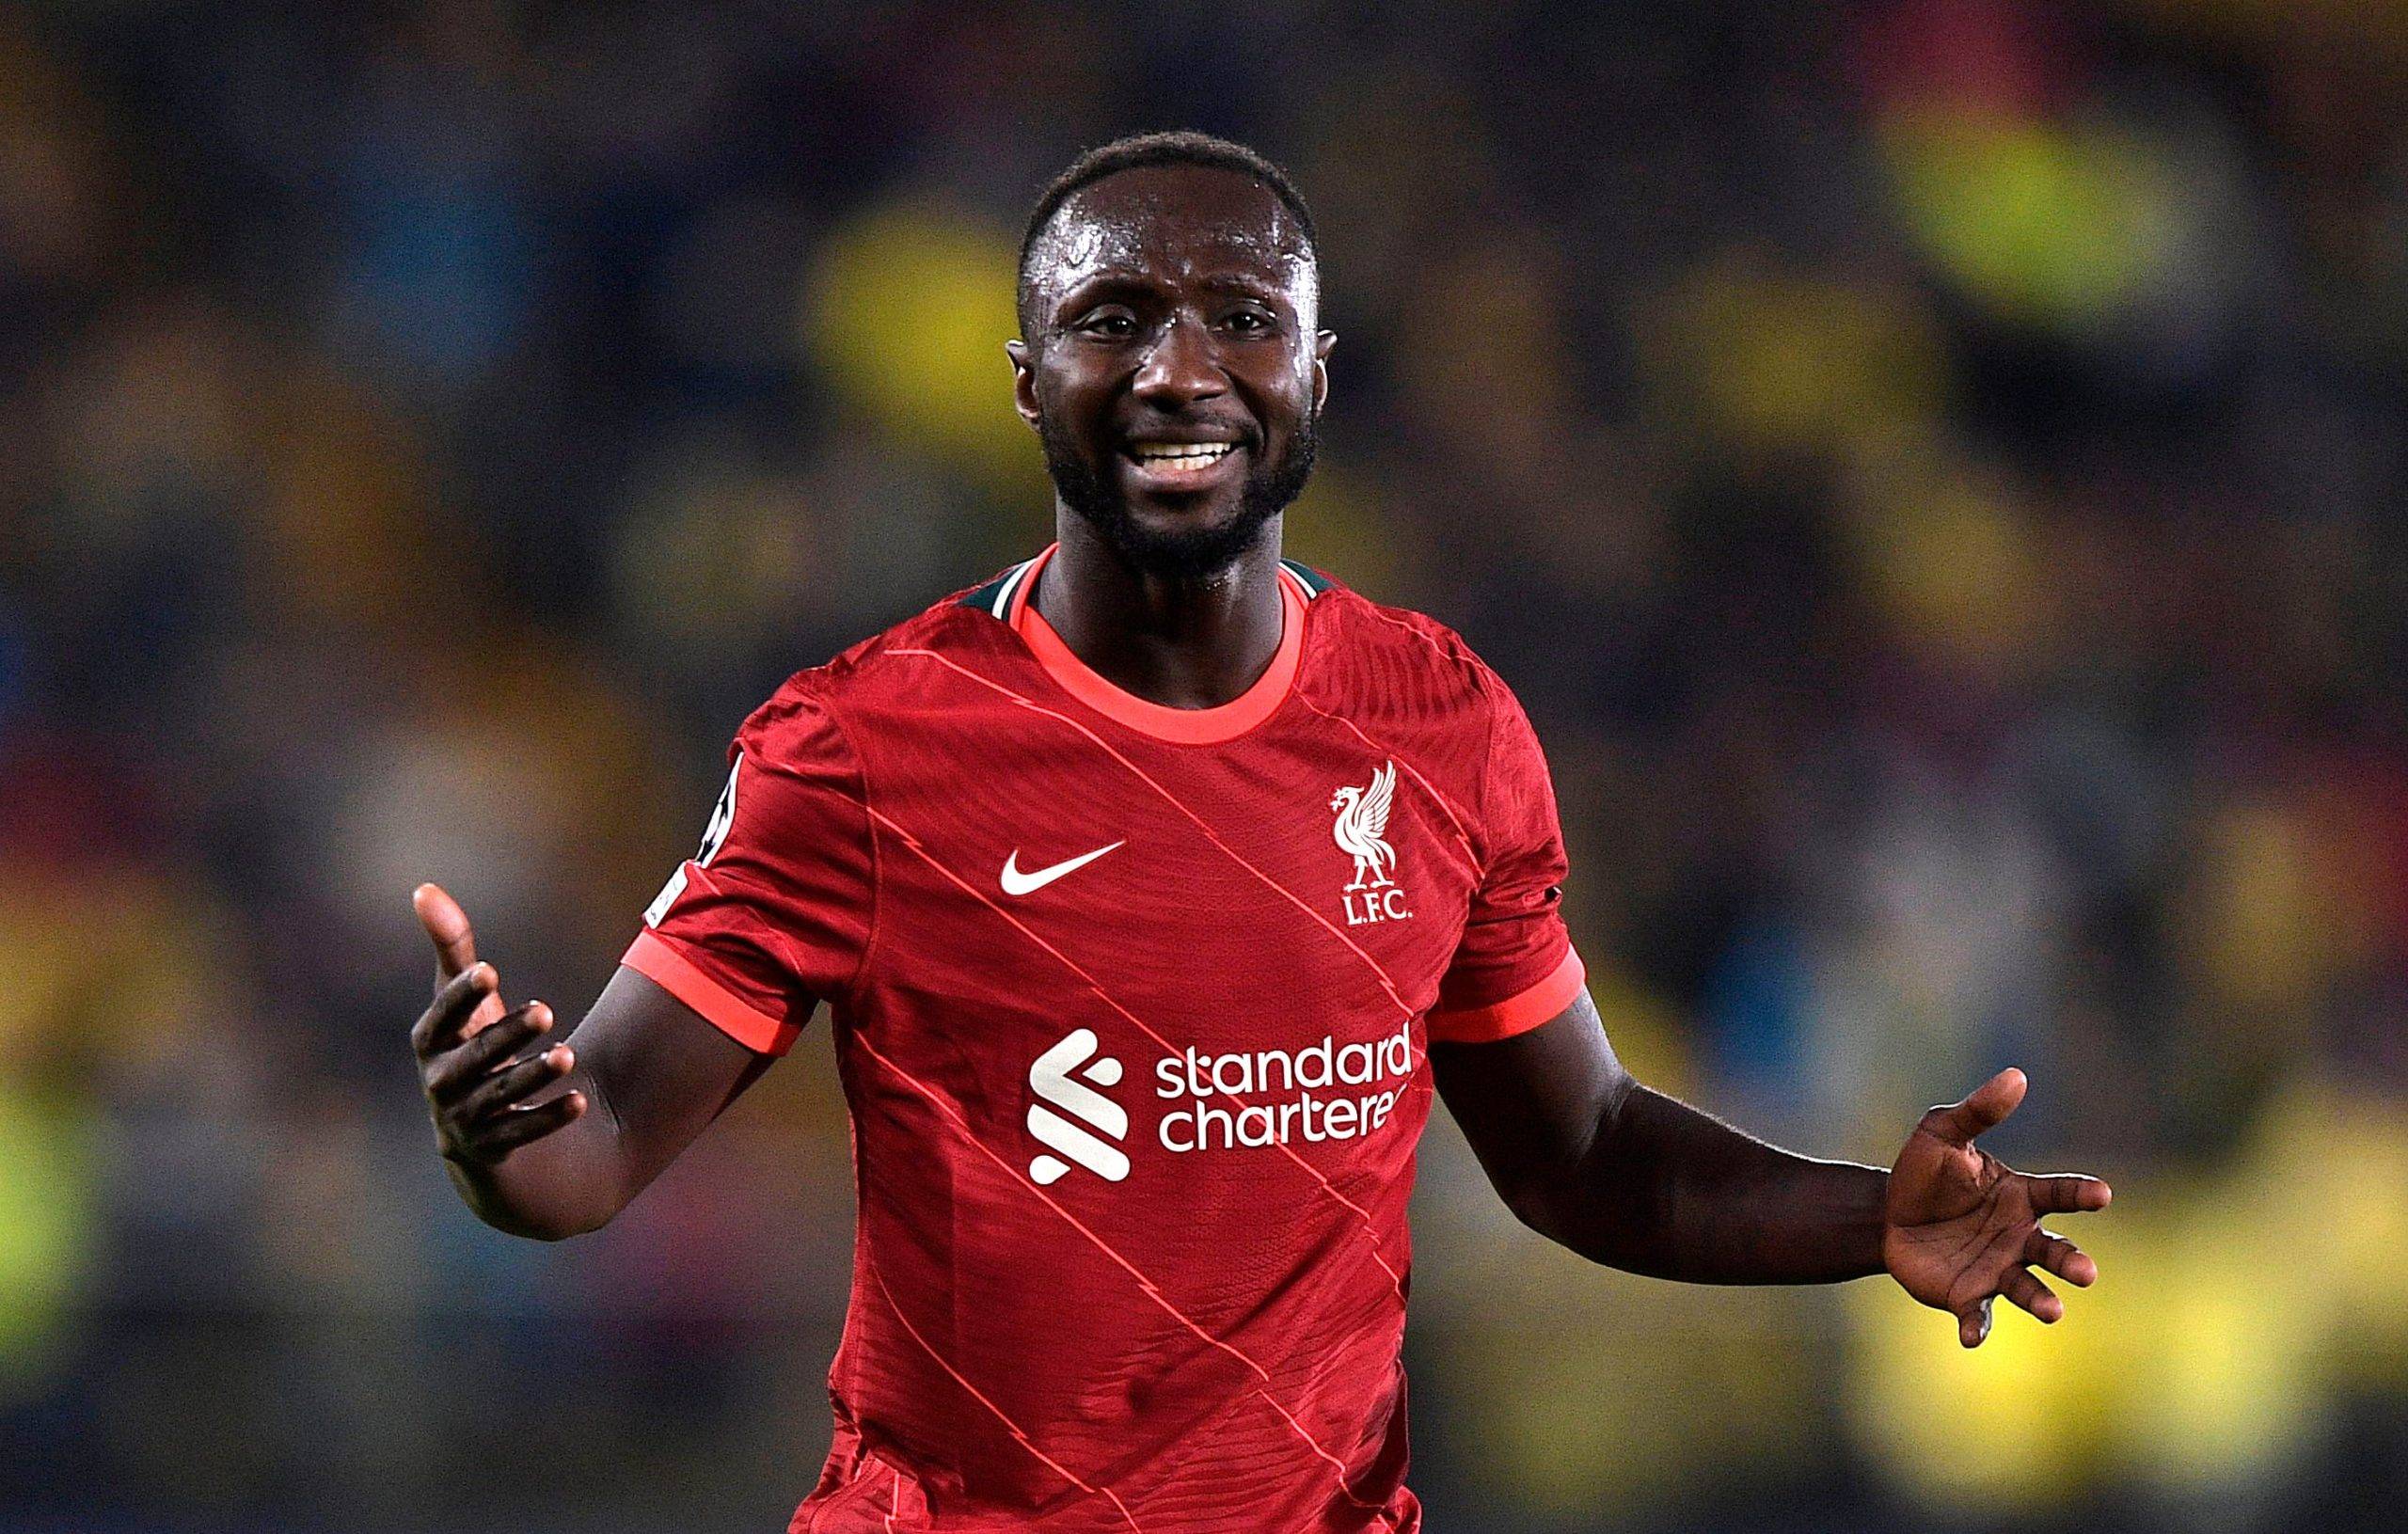 Liverpool: Naby Keita 'increasingly' likely to leave this summer - Liverpool News